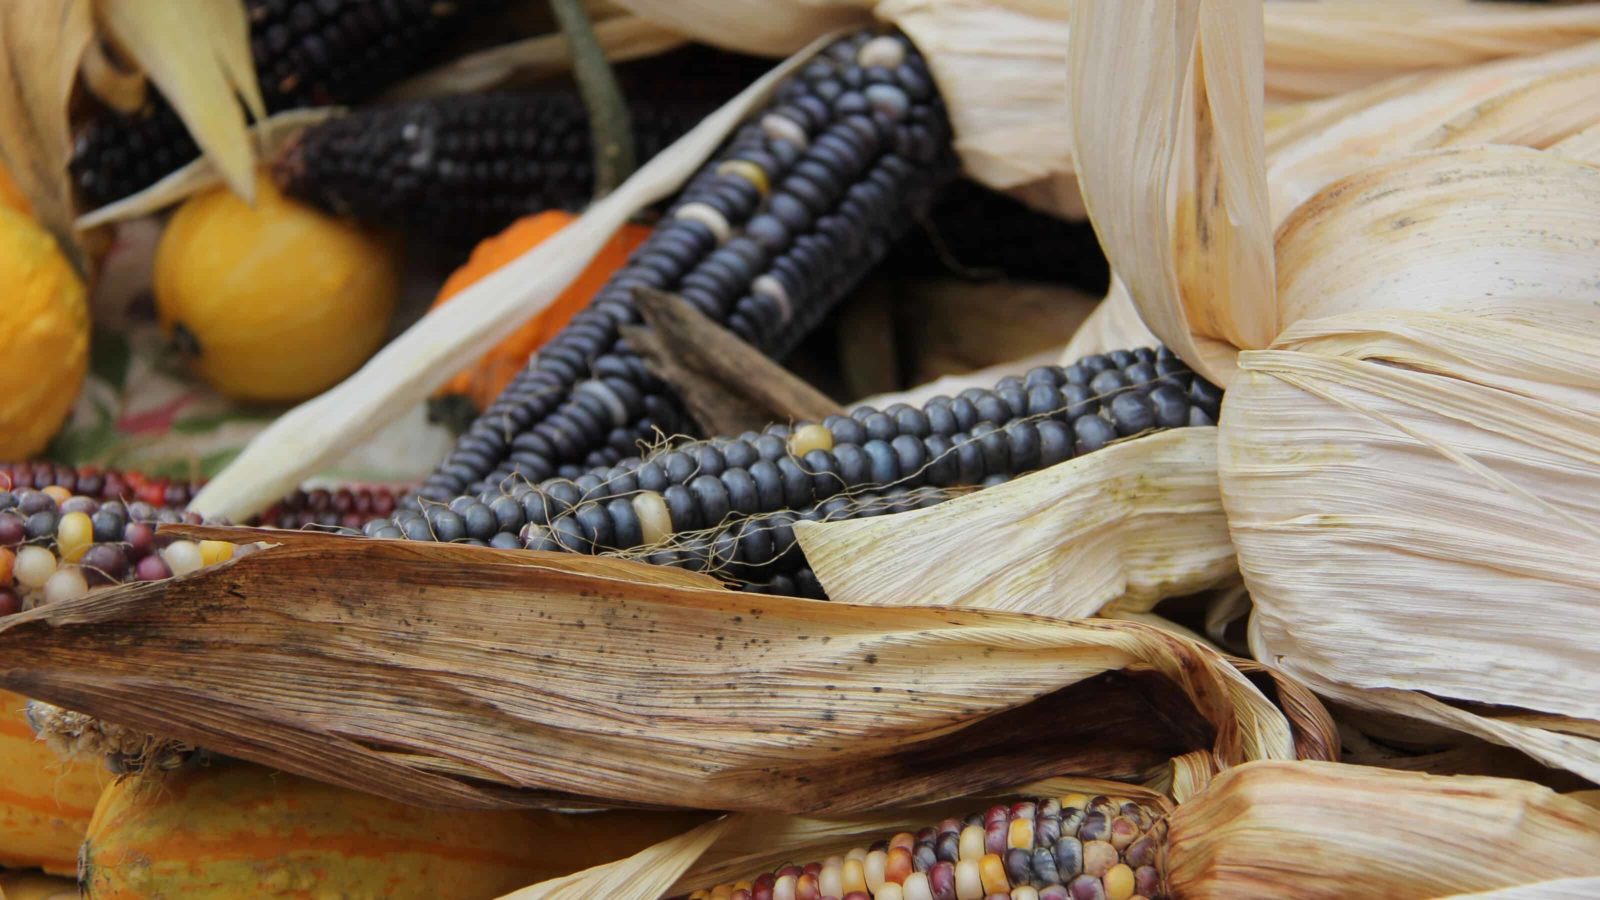 Traditional and heirloom varieties of corn can be good for popping or for flour, or sometimes simply beautiful.